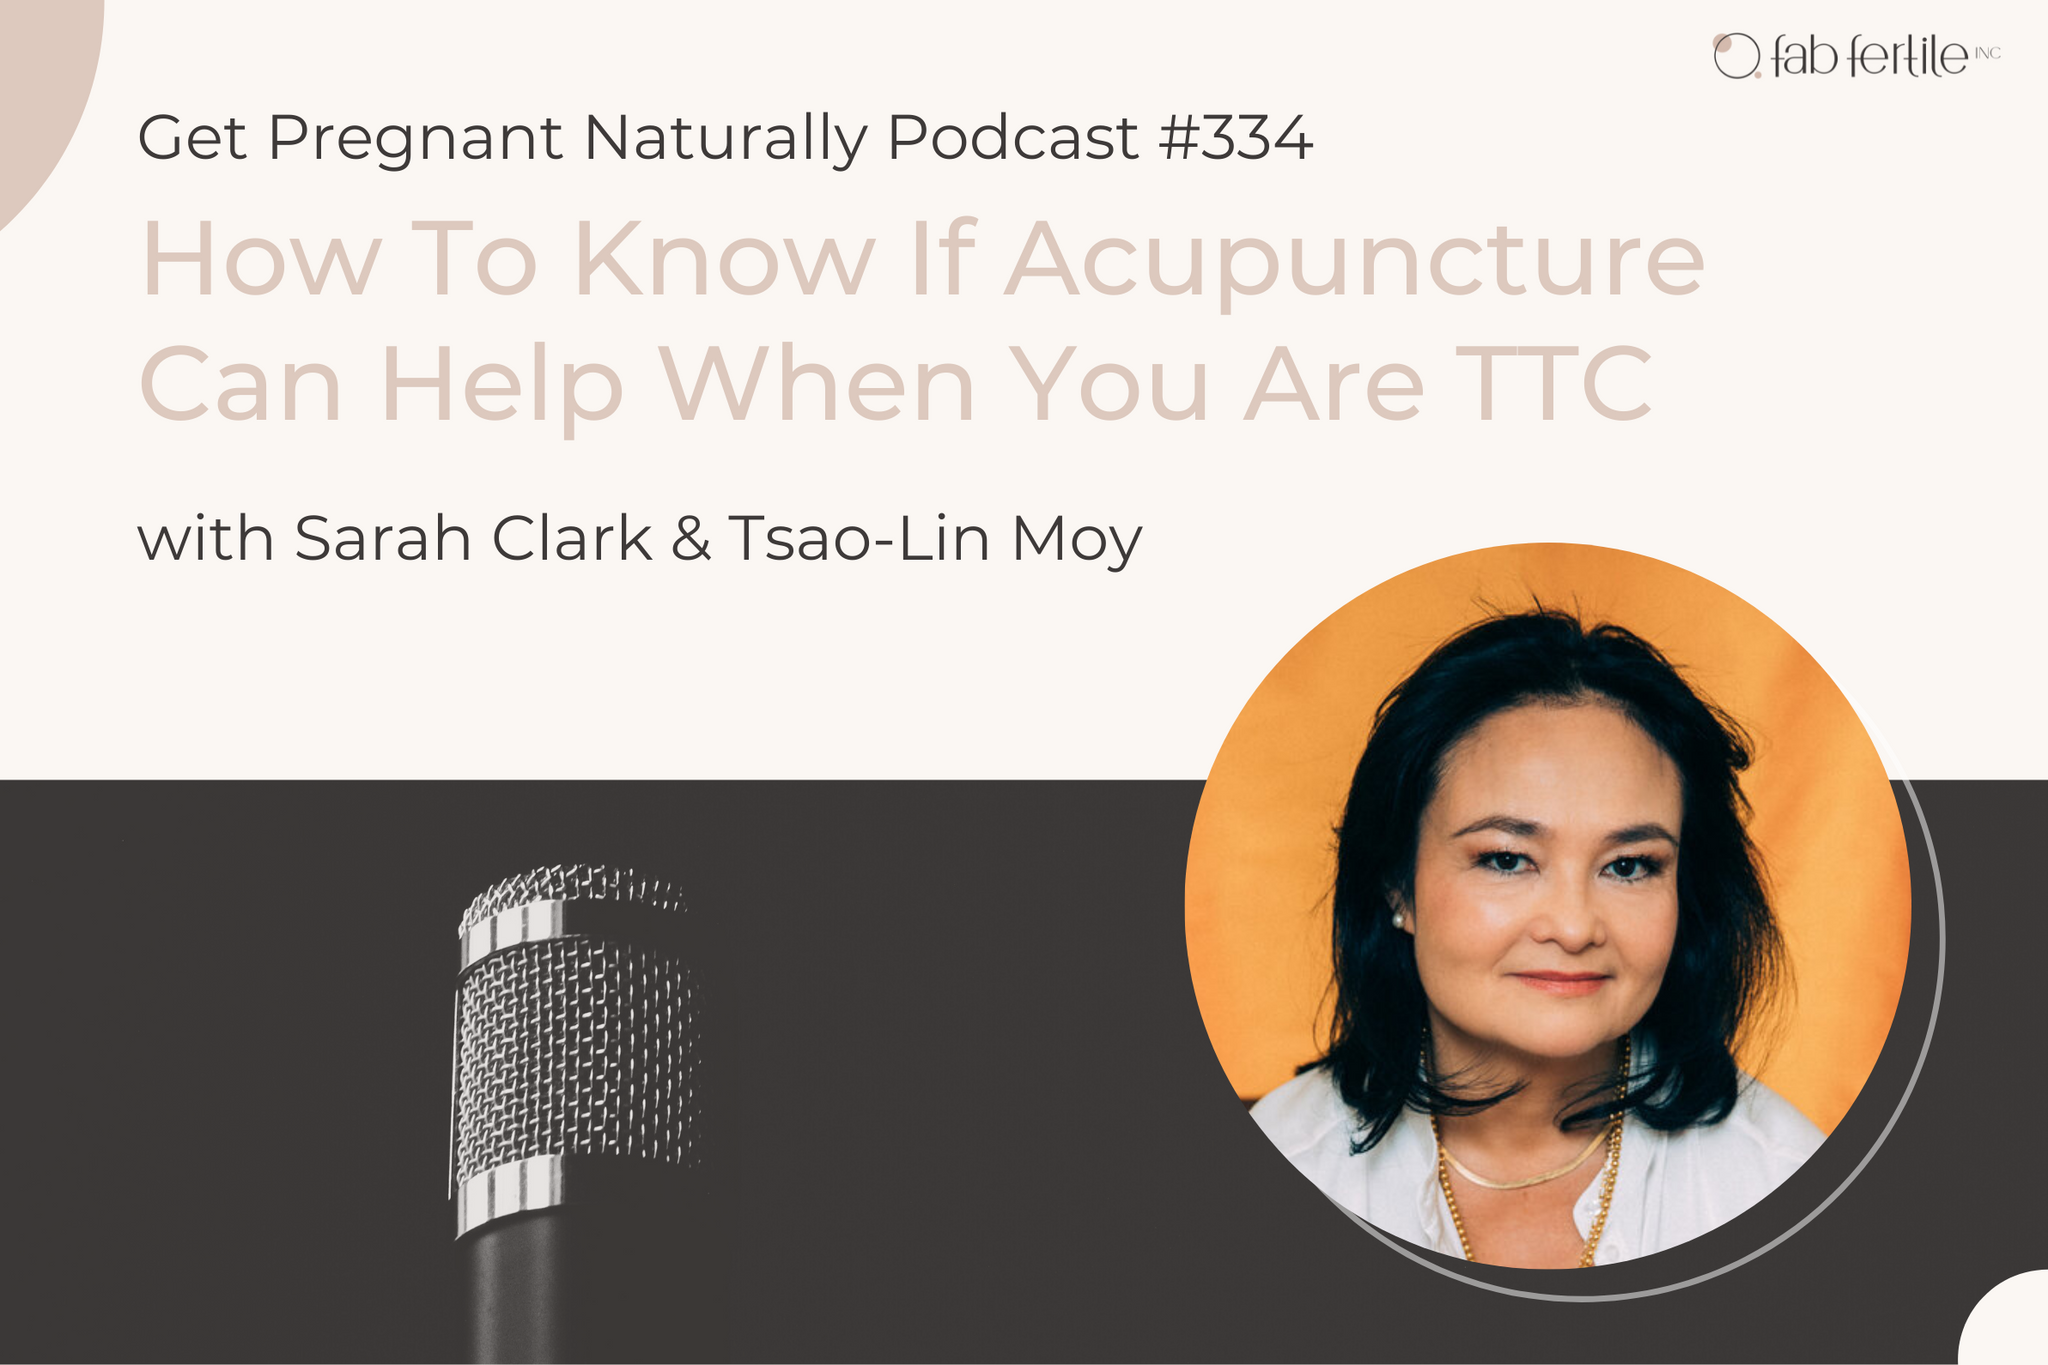 How To Know If Acupuncture Can Help When You Are TTC